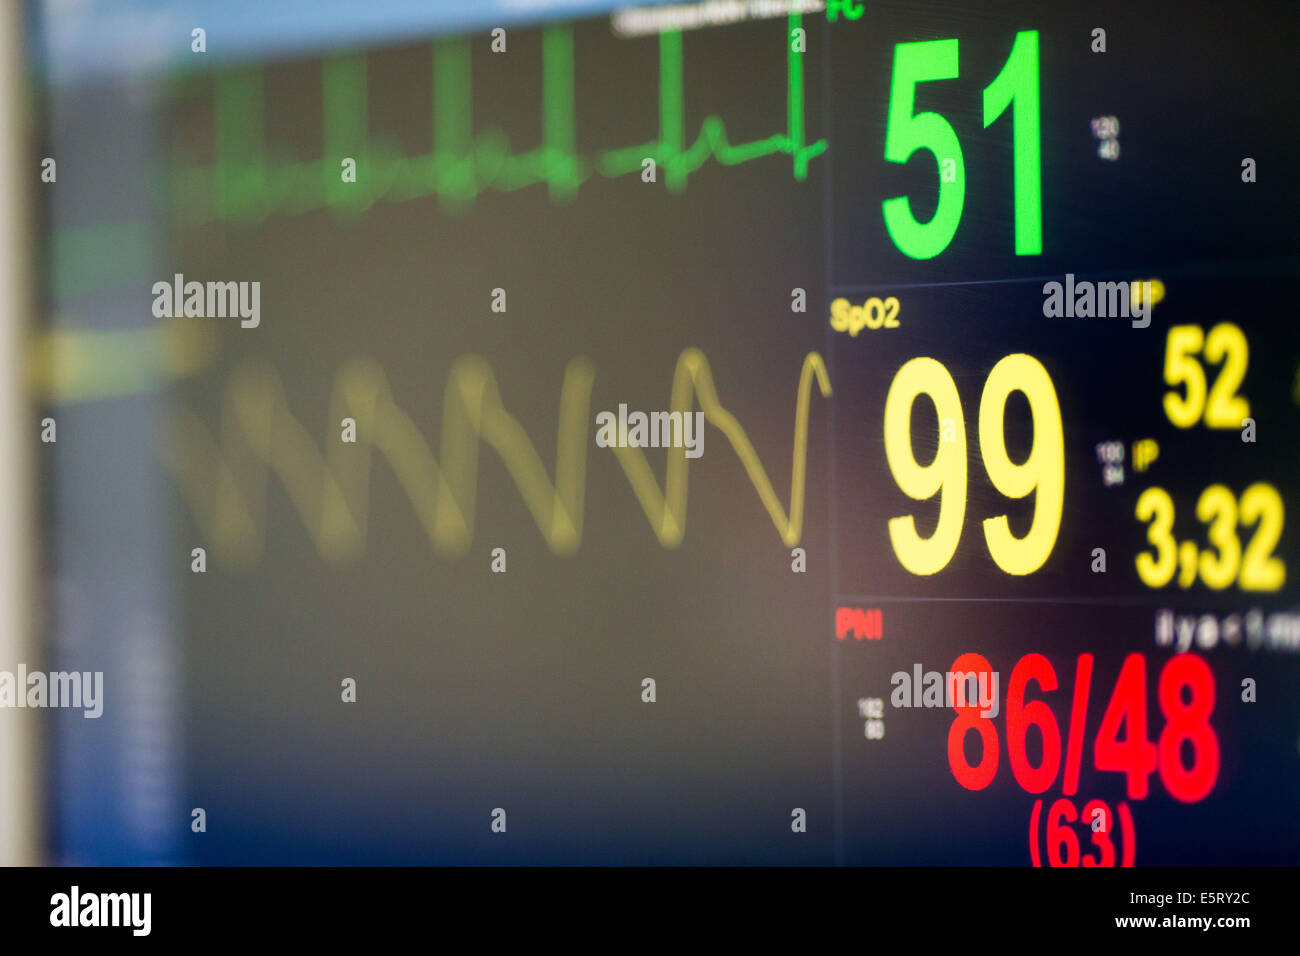 https://c8.alamy.com/comp/E5RY2C/monitoring-during-surgery-the-vital-signs-heart-rate-temperature-blood-E5RY2C.jpg